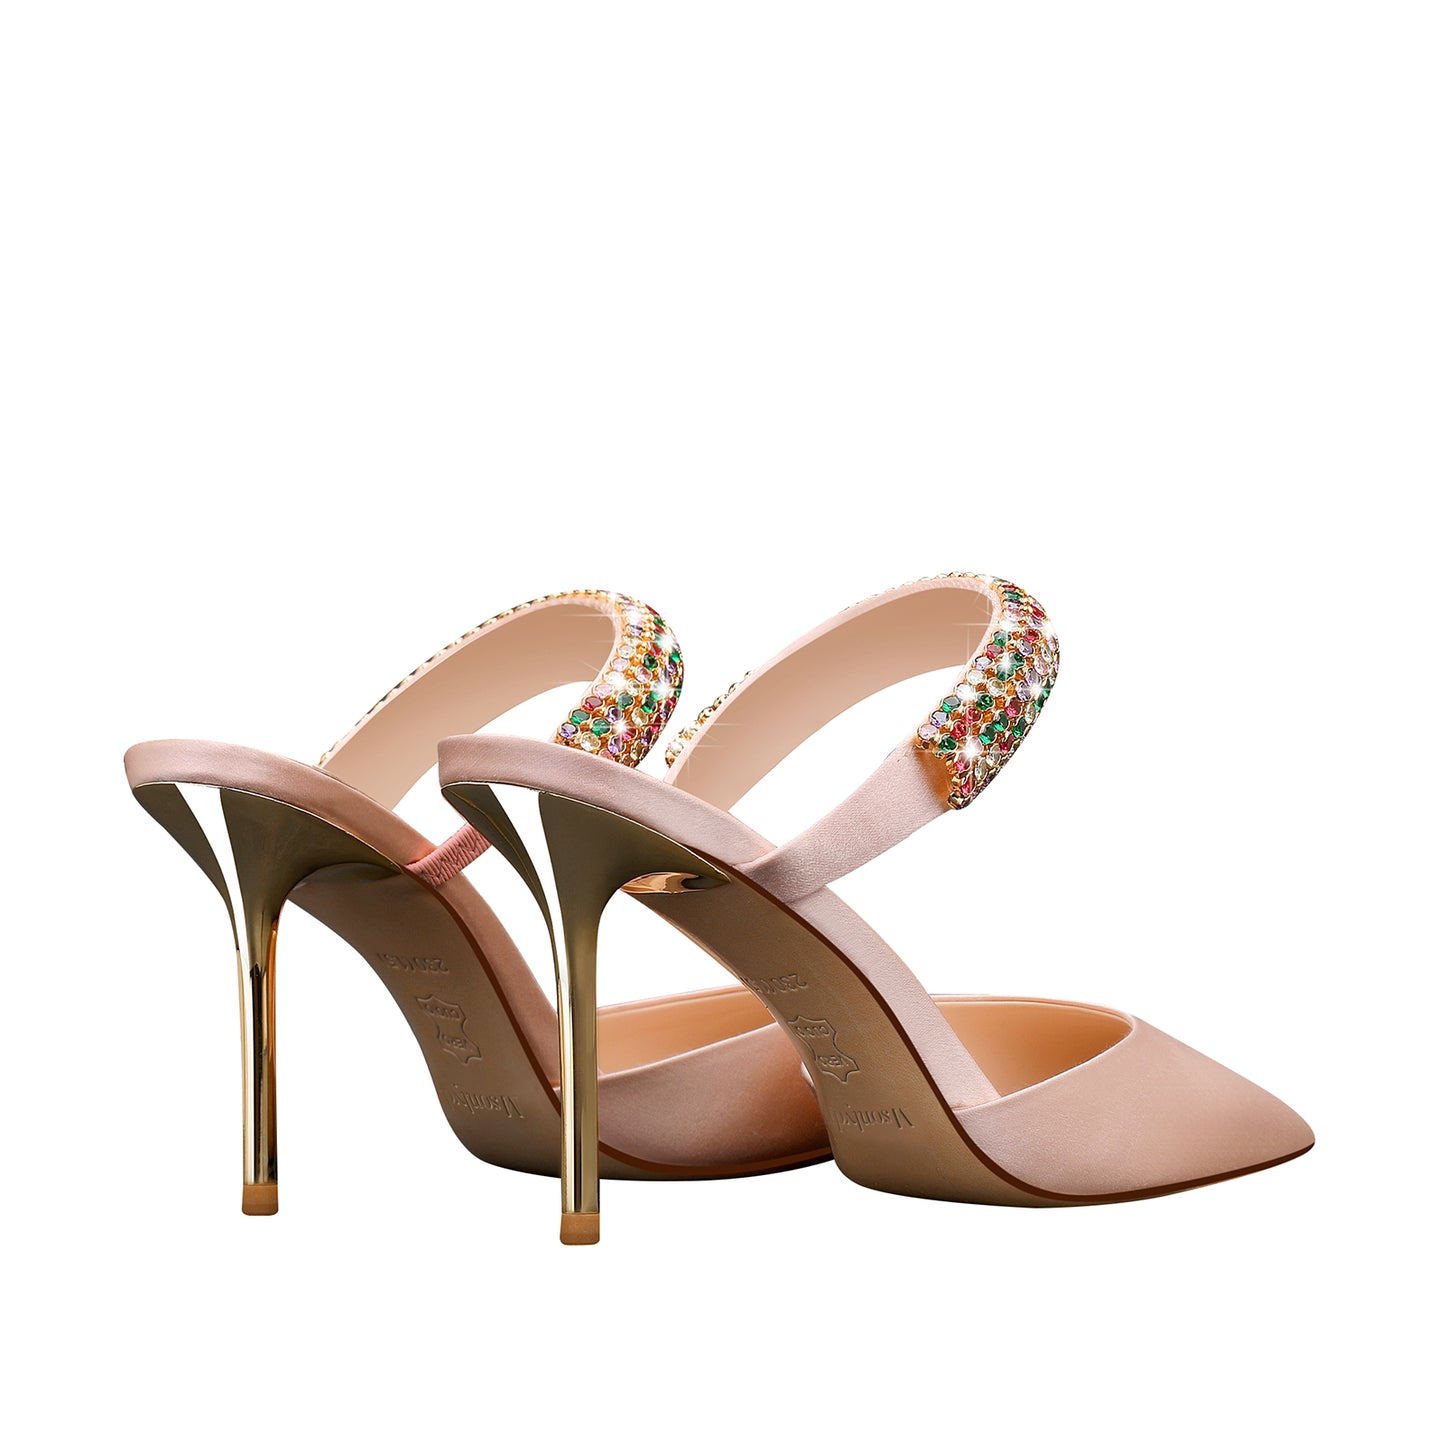 Stunning Open Toe Pumps, Leather High Heels, Mules & Stiletto Sandals for Women